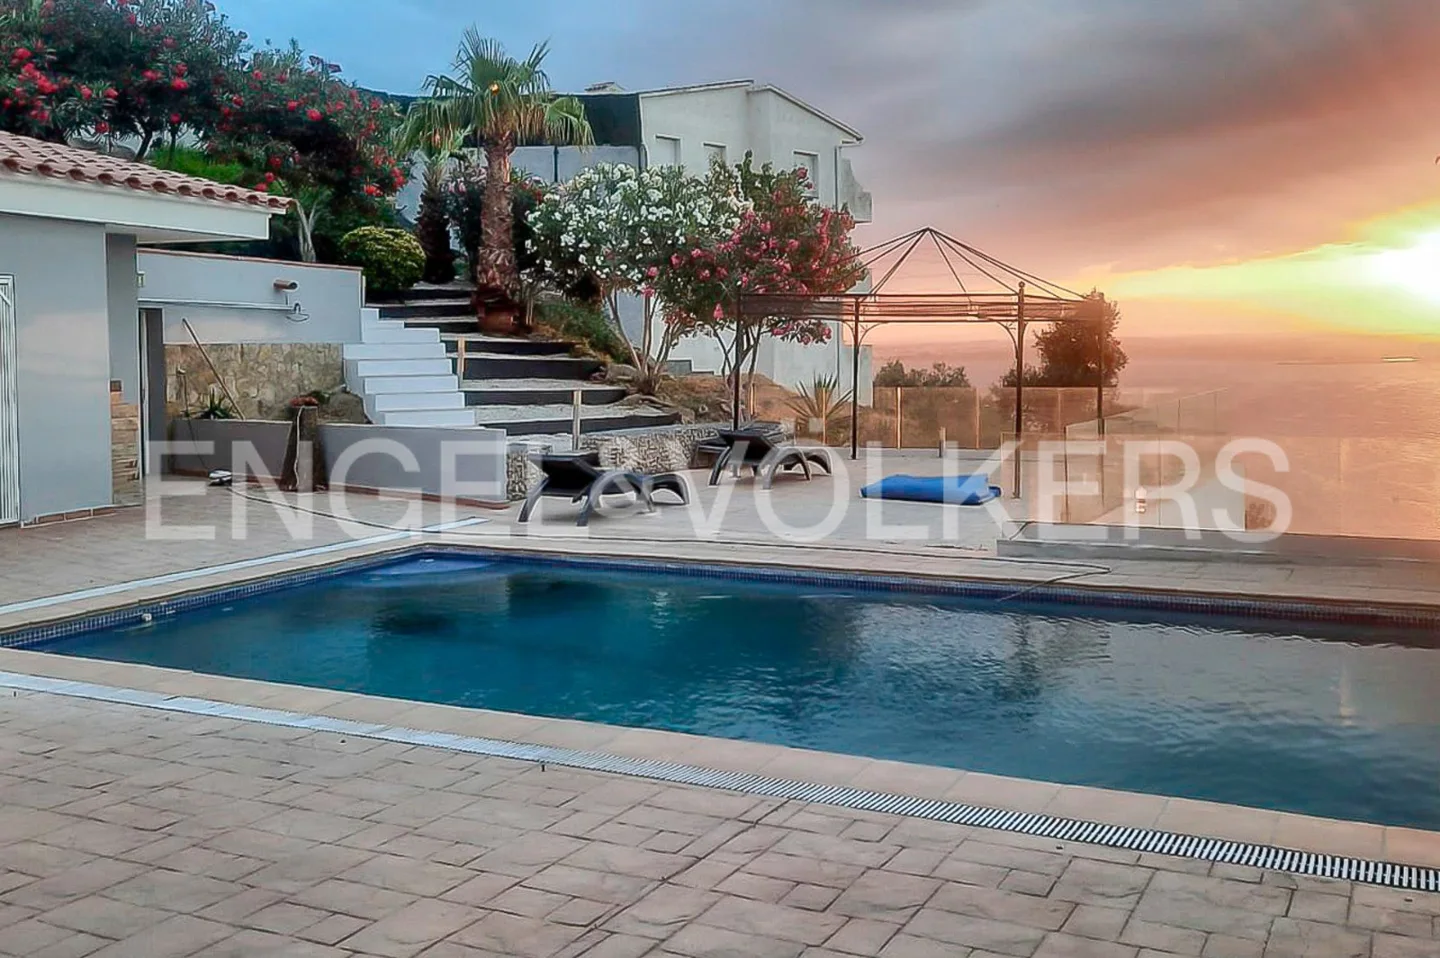 Exclusive villa with panoramic views over the bay of Roses